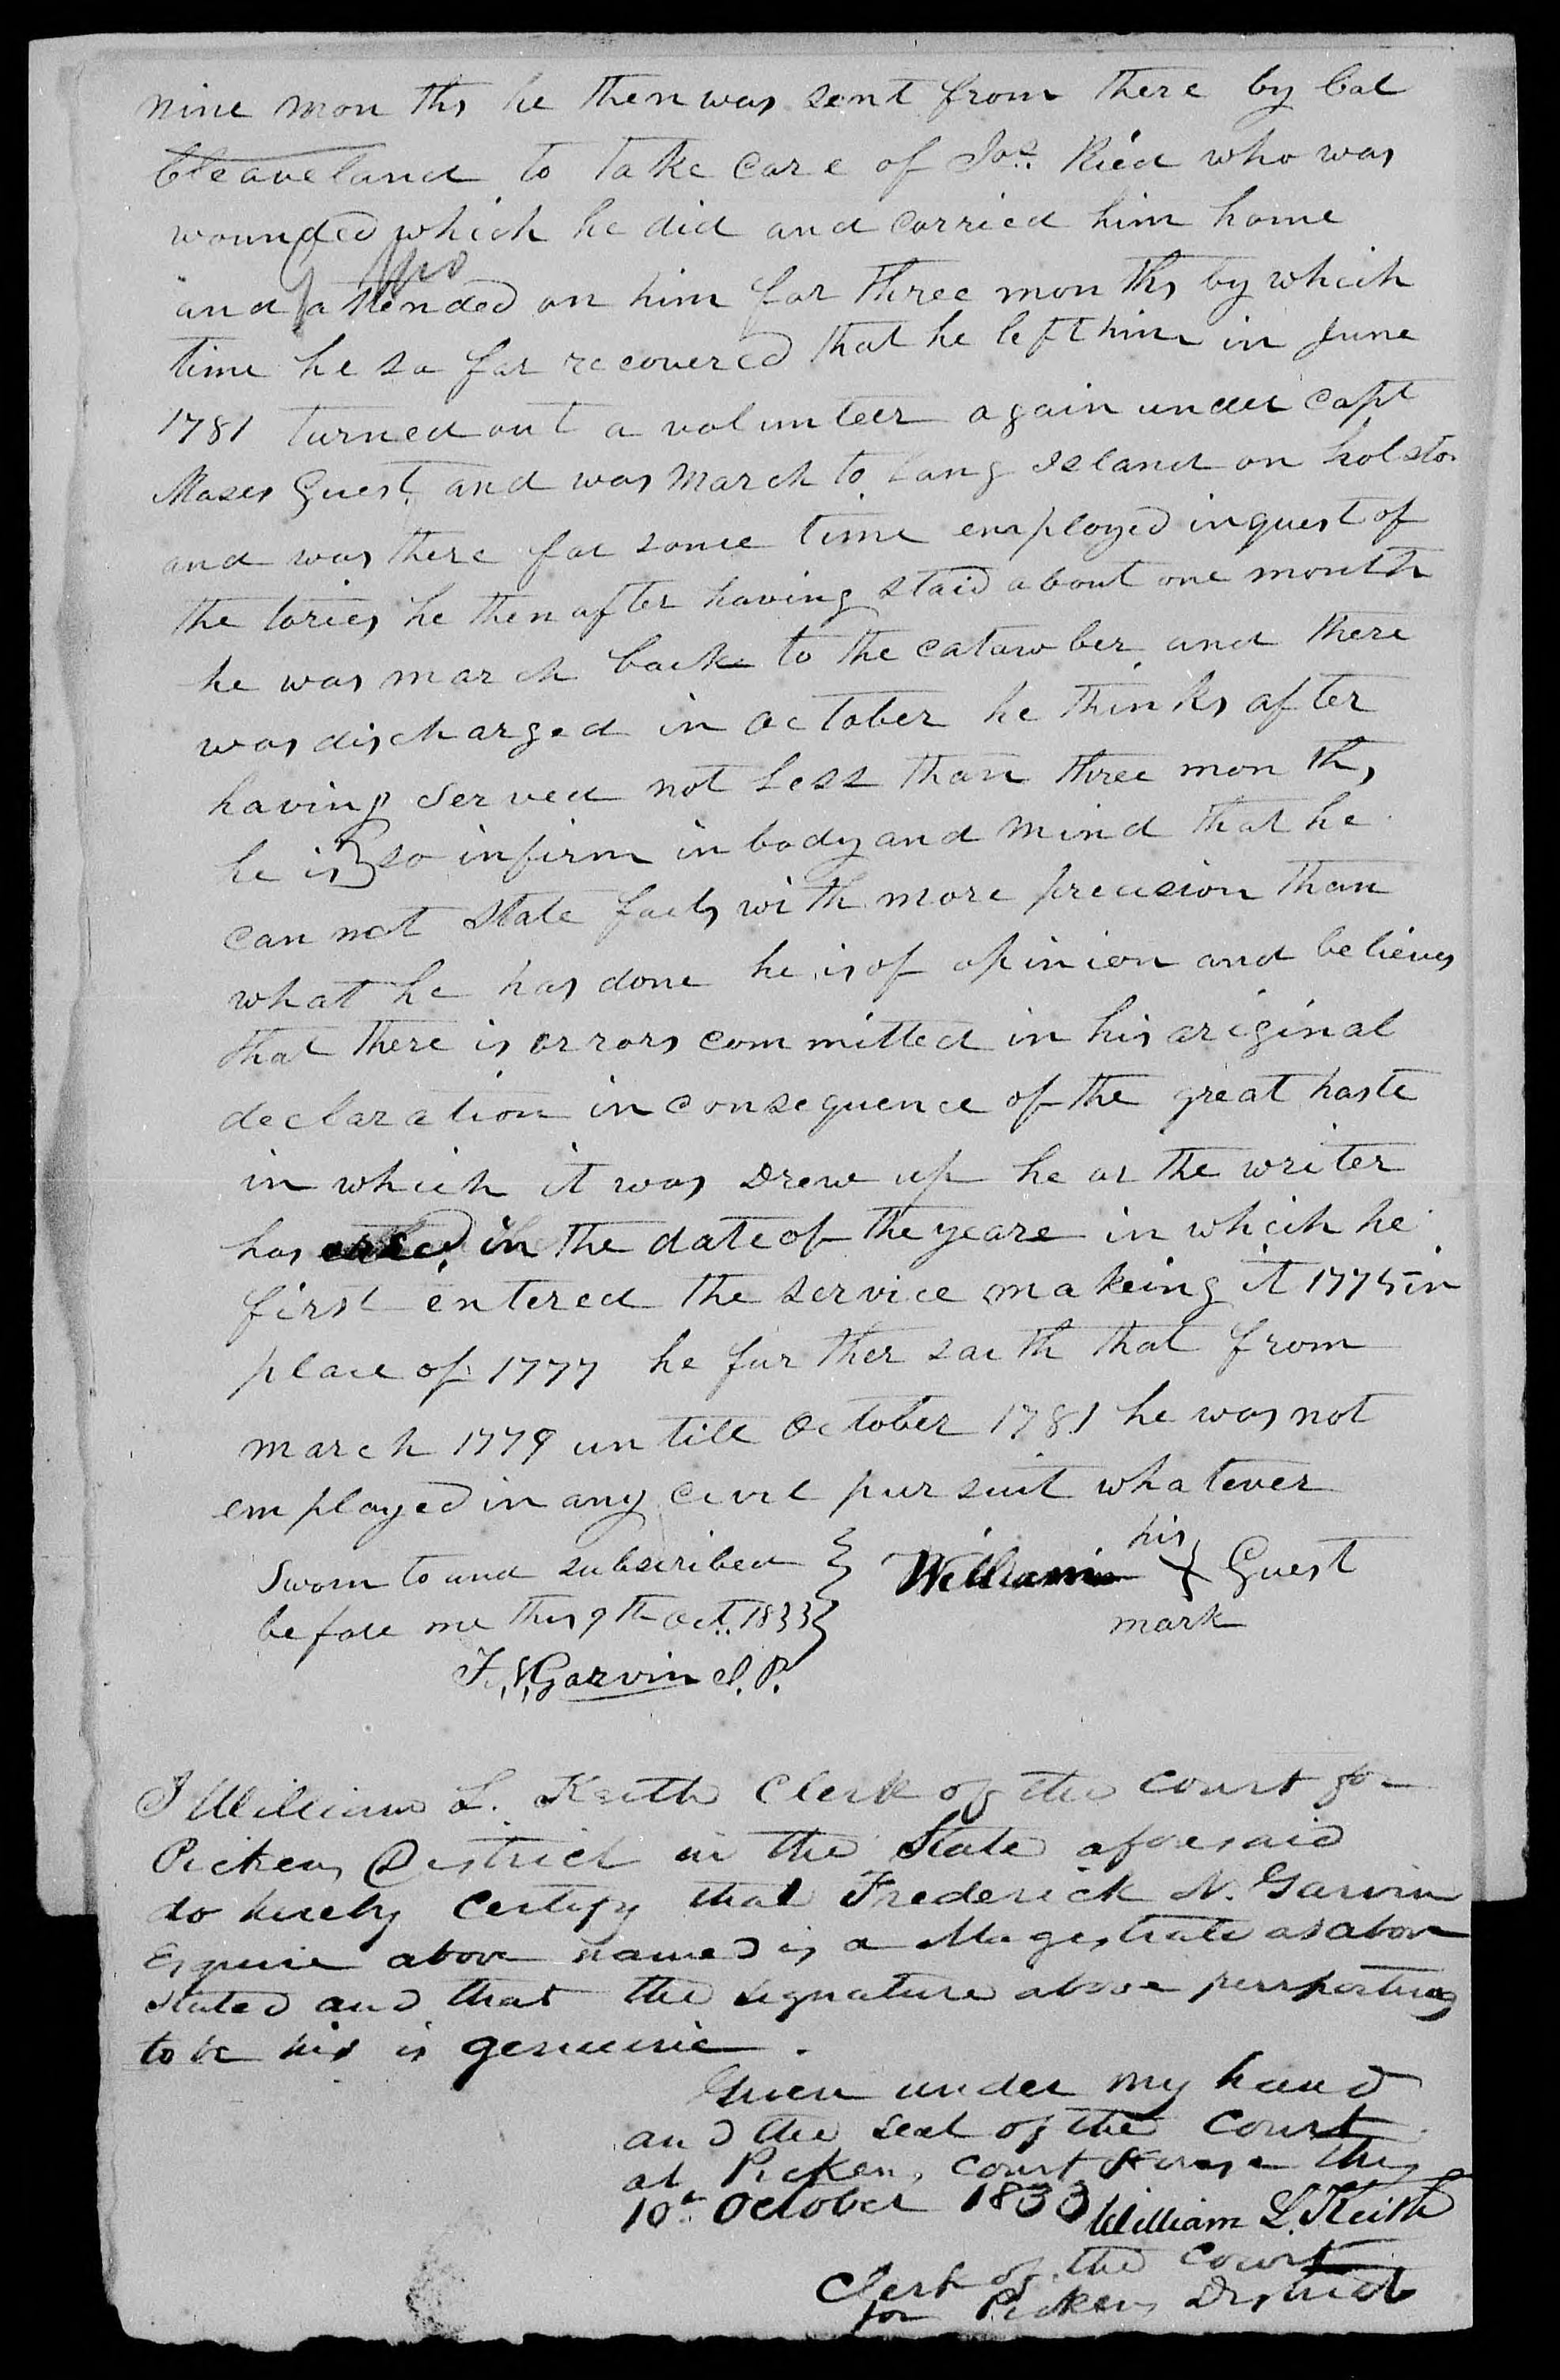 Application for a Veteran's Pension from William Guest, 9 October 1833, page 2